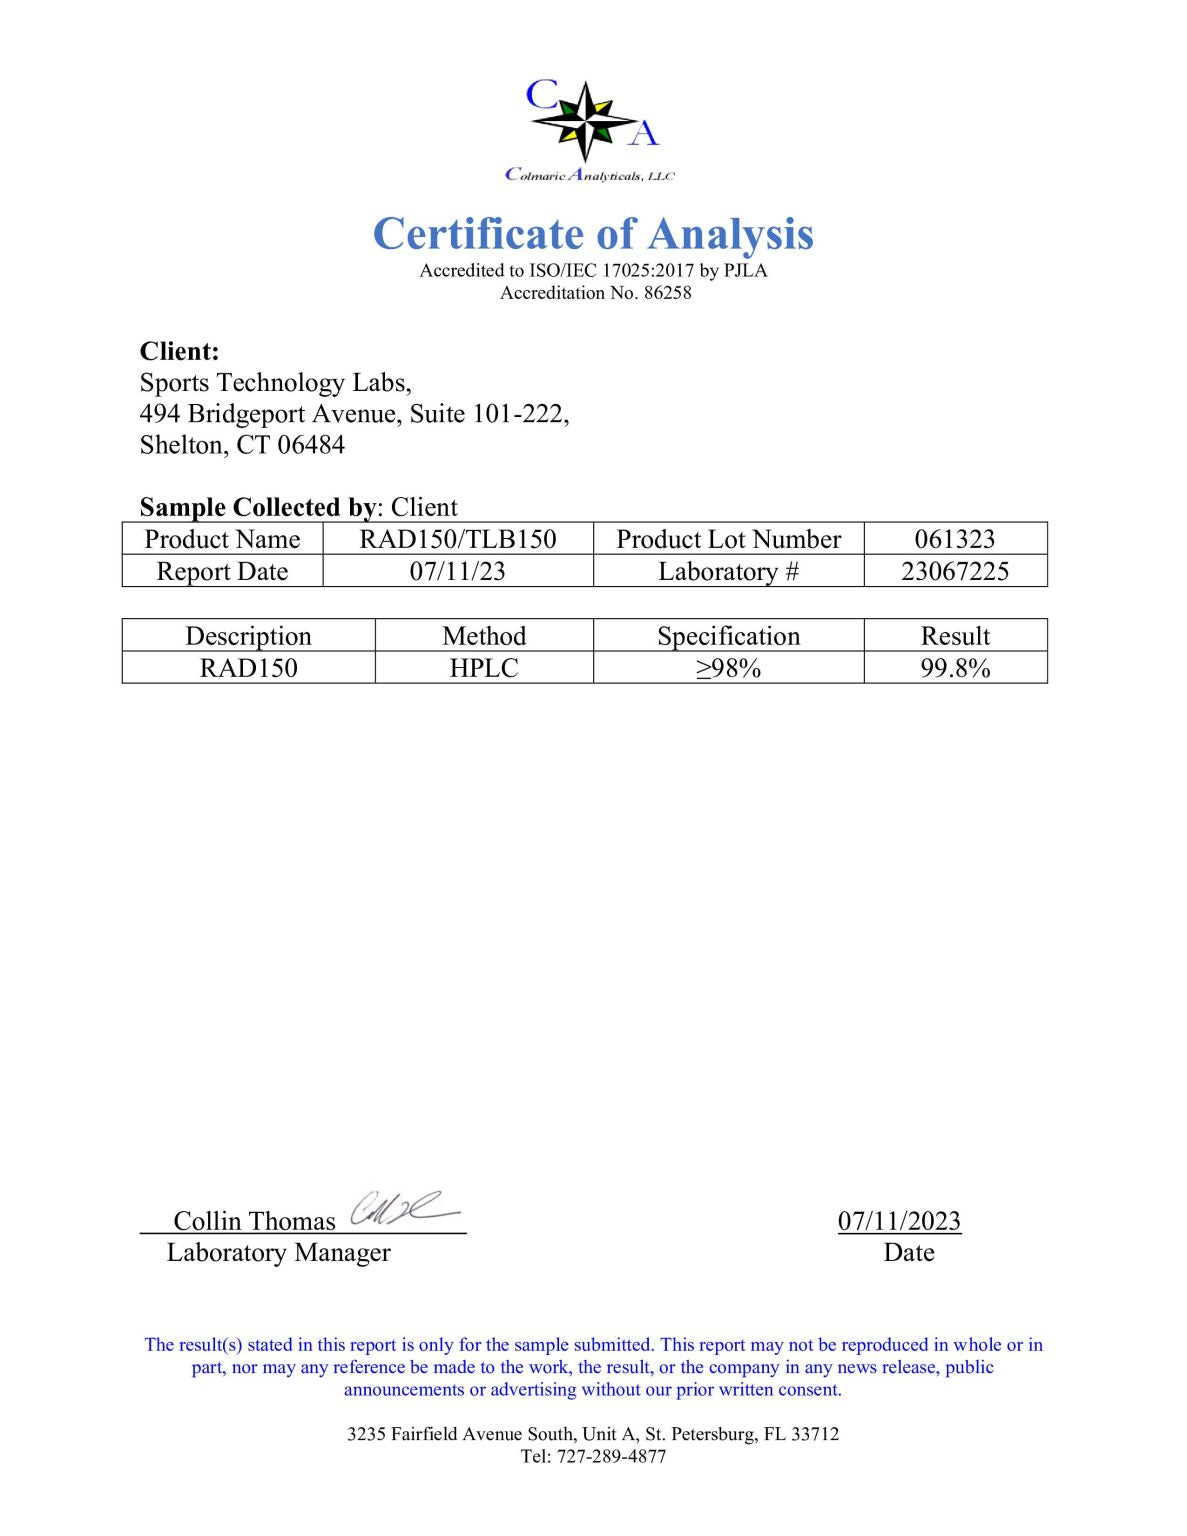 Sports Technology Labs SARMs RAD 150 Certificate of Analysis